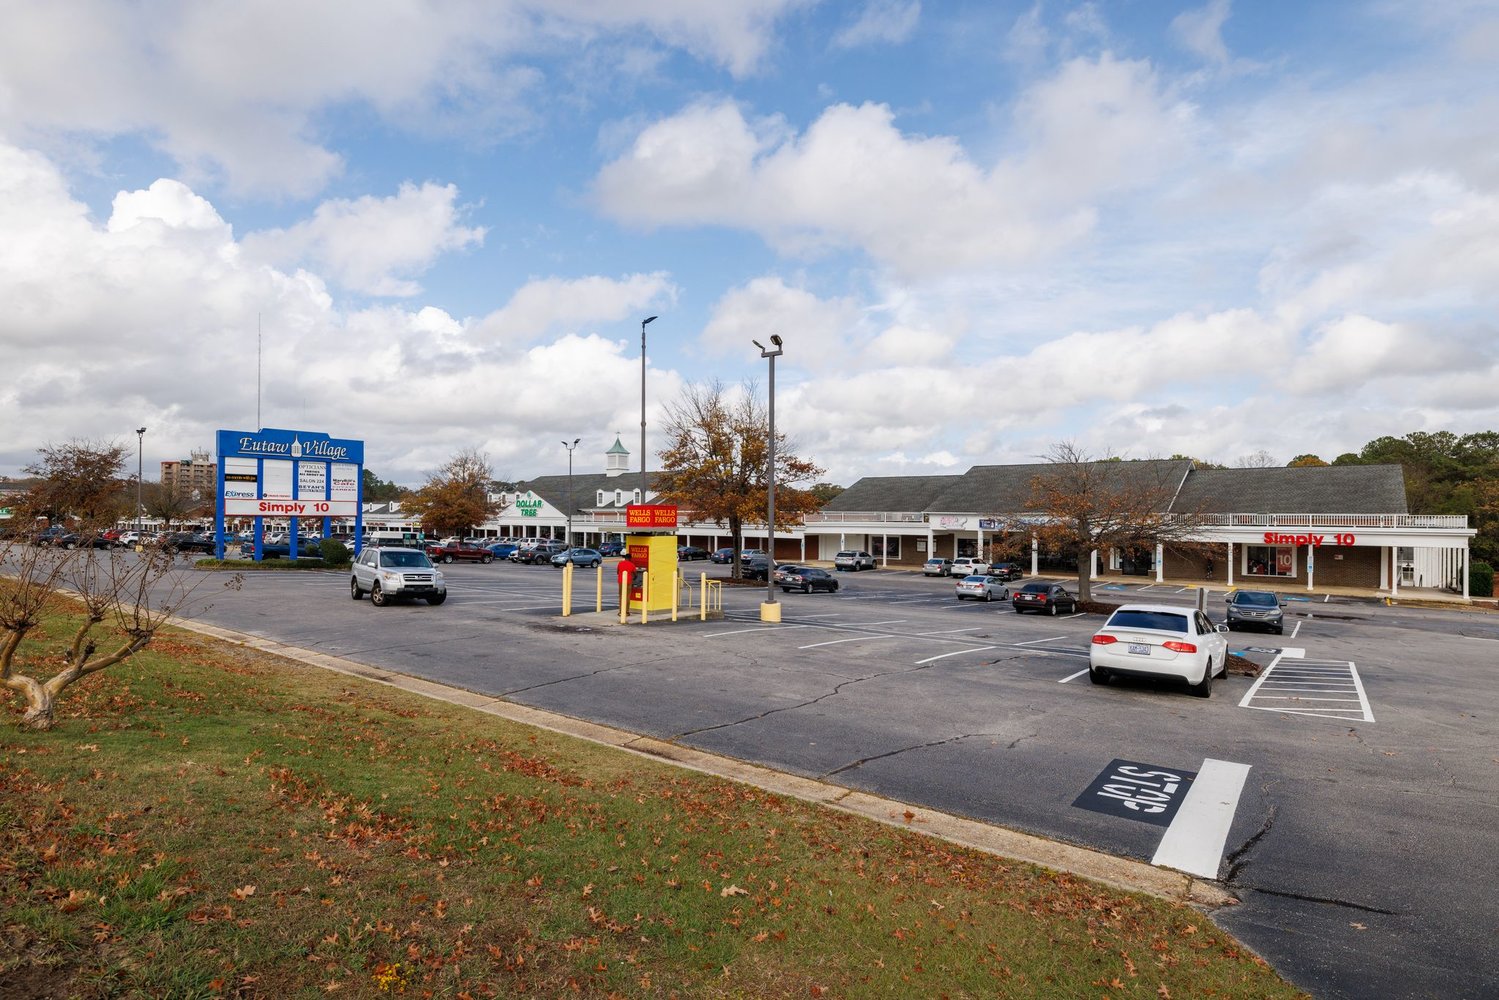 The new owners of Eutaw Village Shopping Center on Bragg Boulevard are renovating and upgrading the buildings and looking for new tenants.